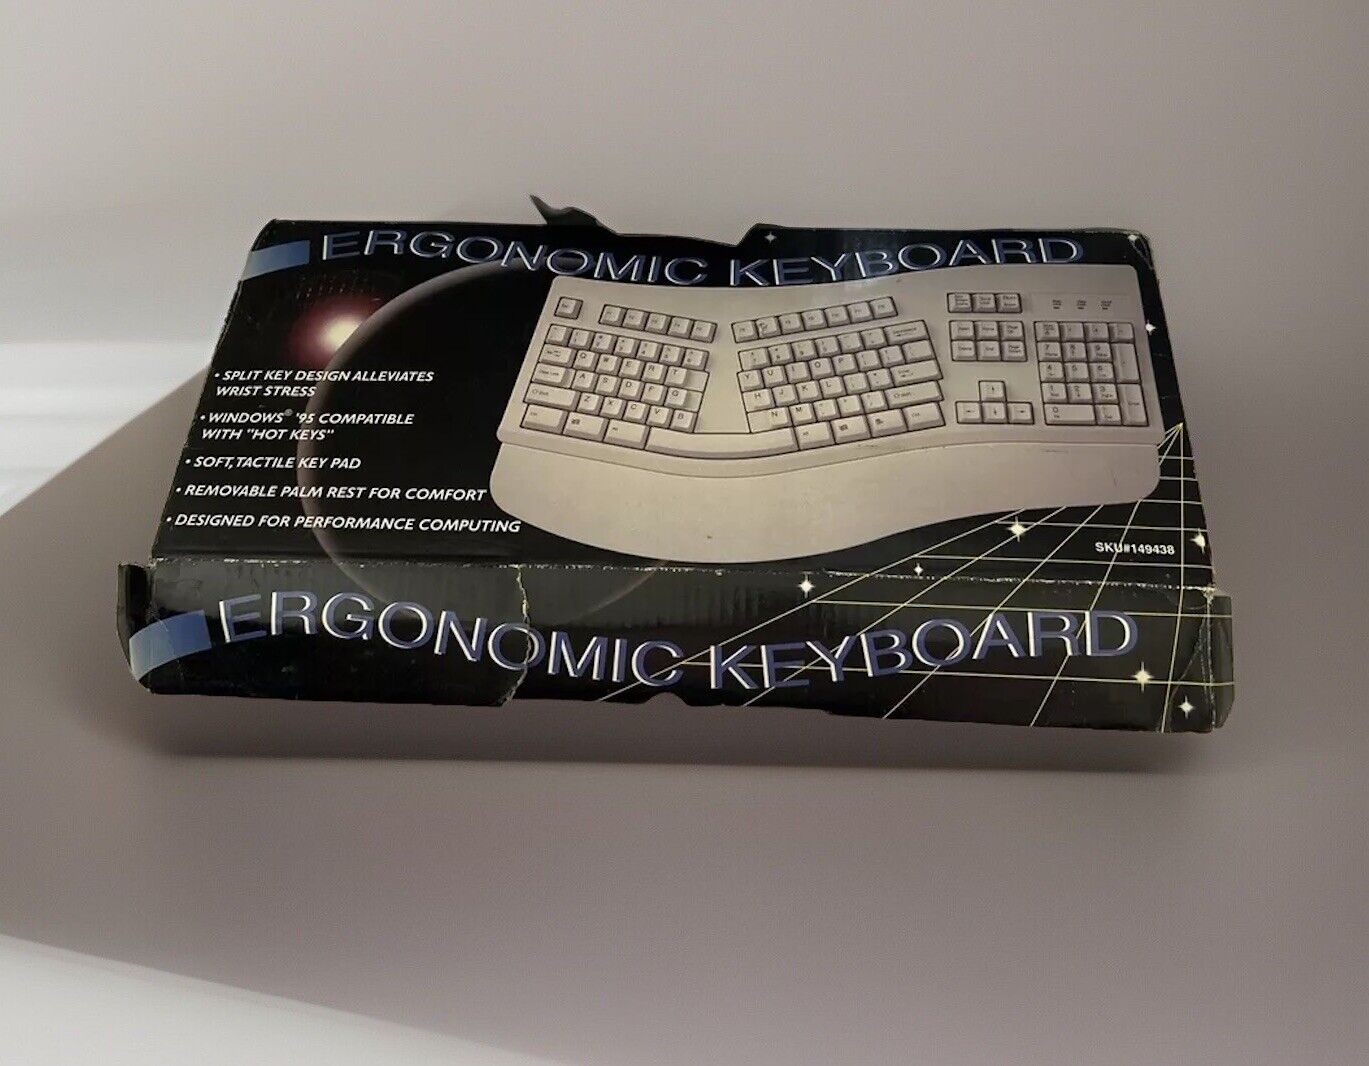 Vintage CompUSA Ergonomic Keyboard With Built-In Touchpad Wired SKU #149438